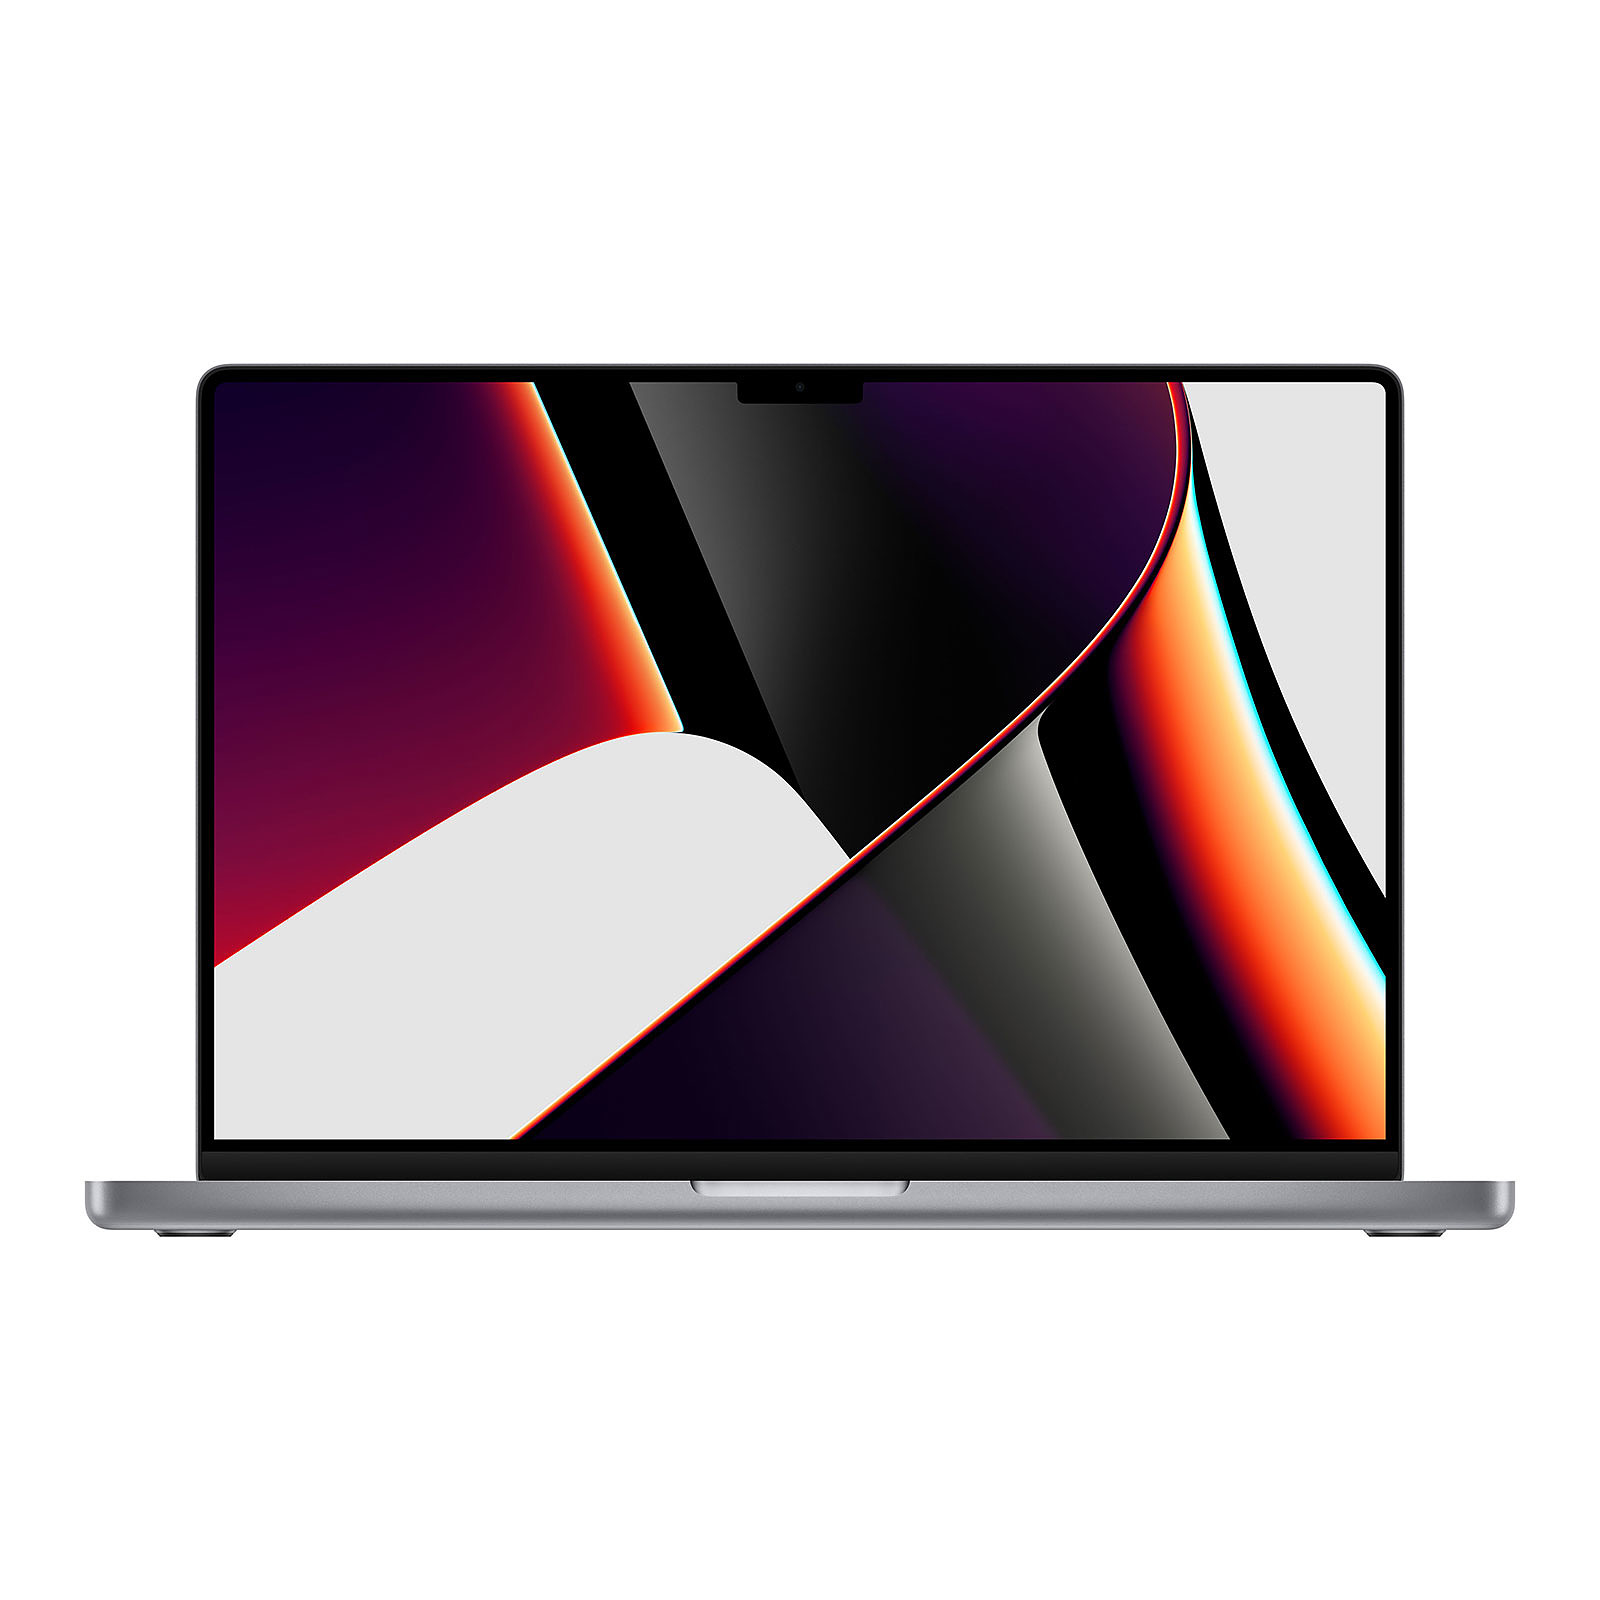 Apple MacBook Pro M1 Max (2021) 16" Gris sideral 32Go/2To (MK1A3FN/A-2TB) - MacBook Apple